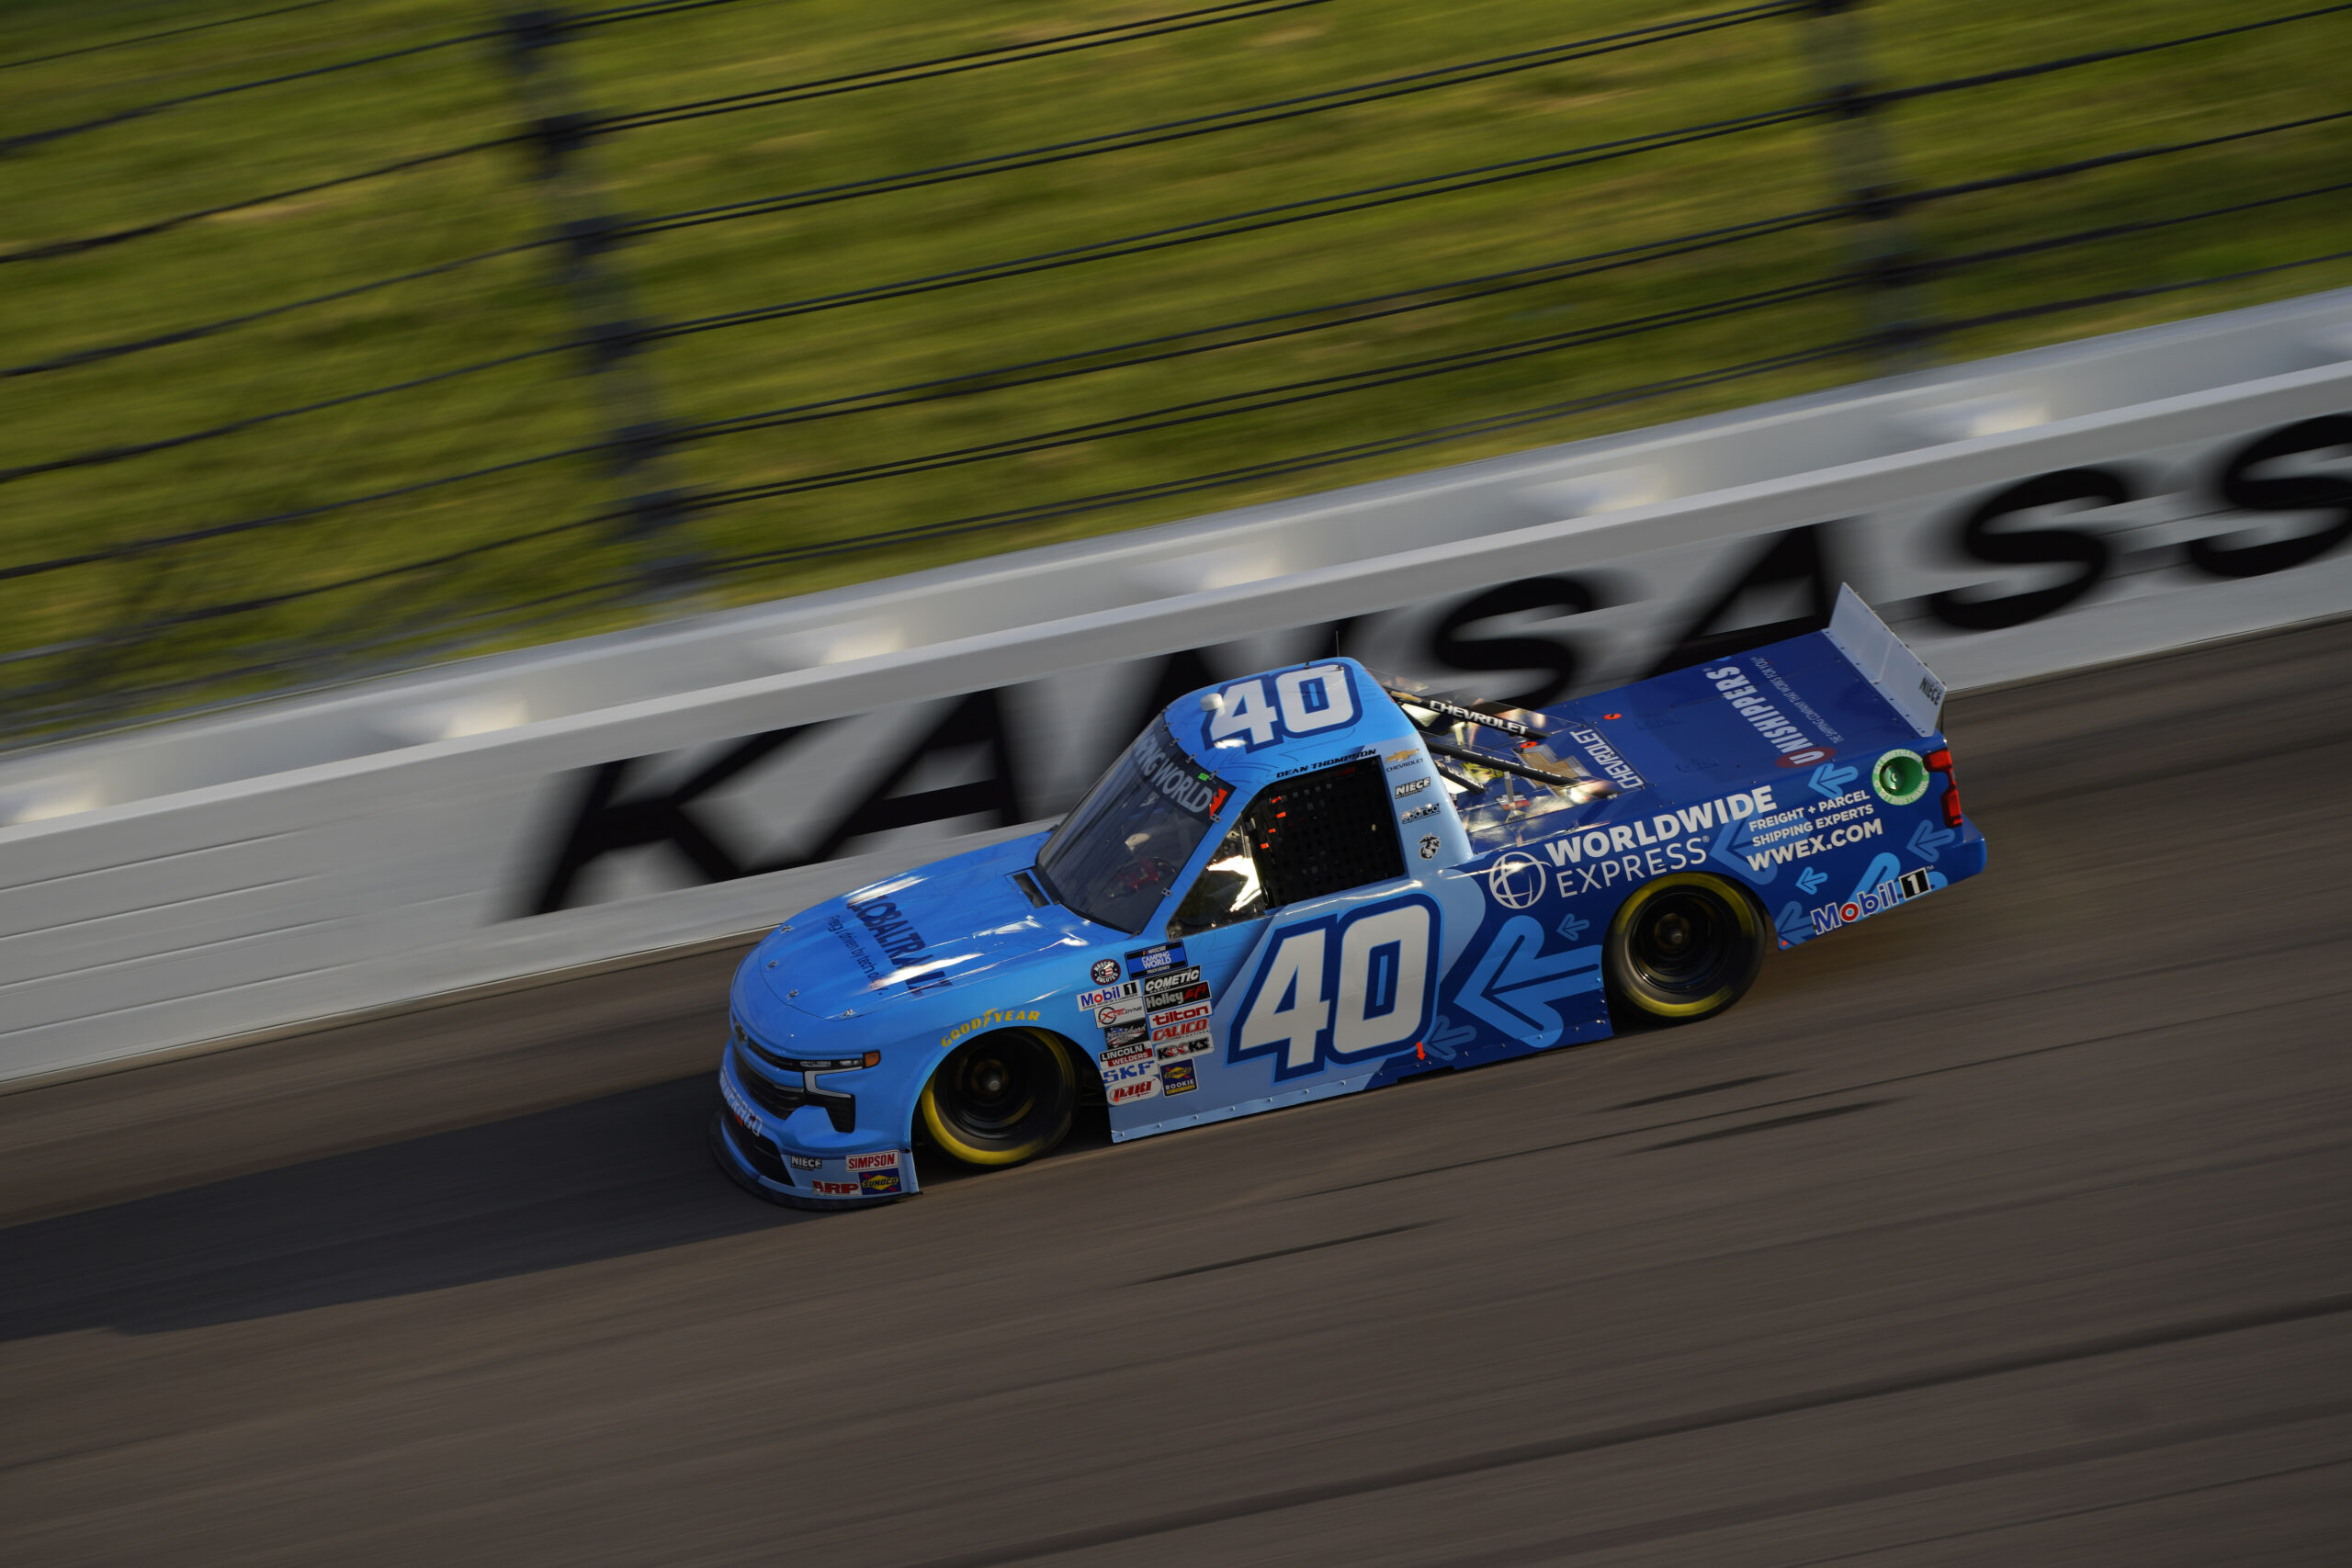 Niece Motorsports takes to the track for the Heart of America 200 at Kansas Speedway in Kansas City, KS.